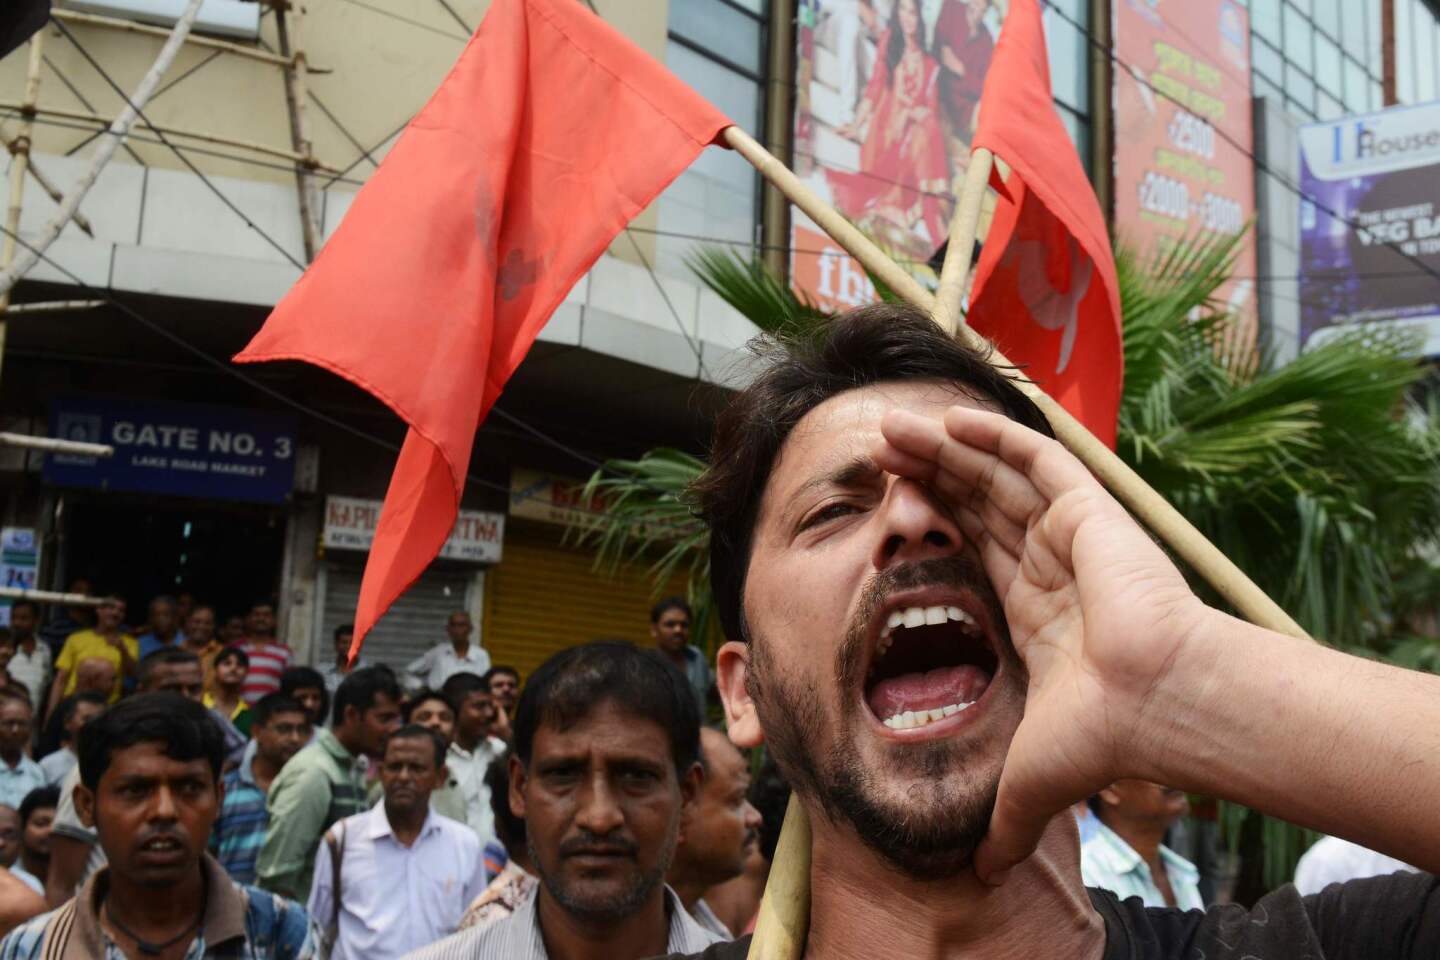 Millions of Indian workers stage strike